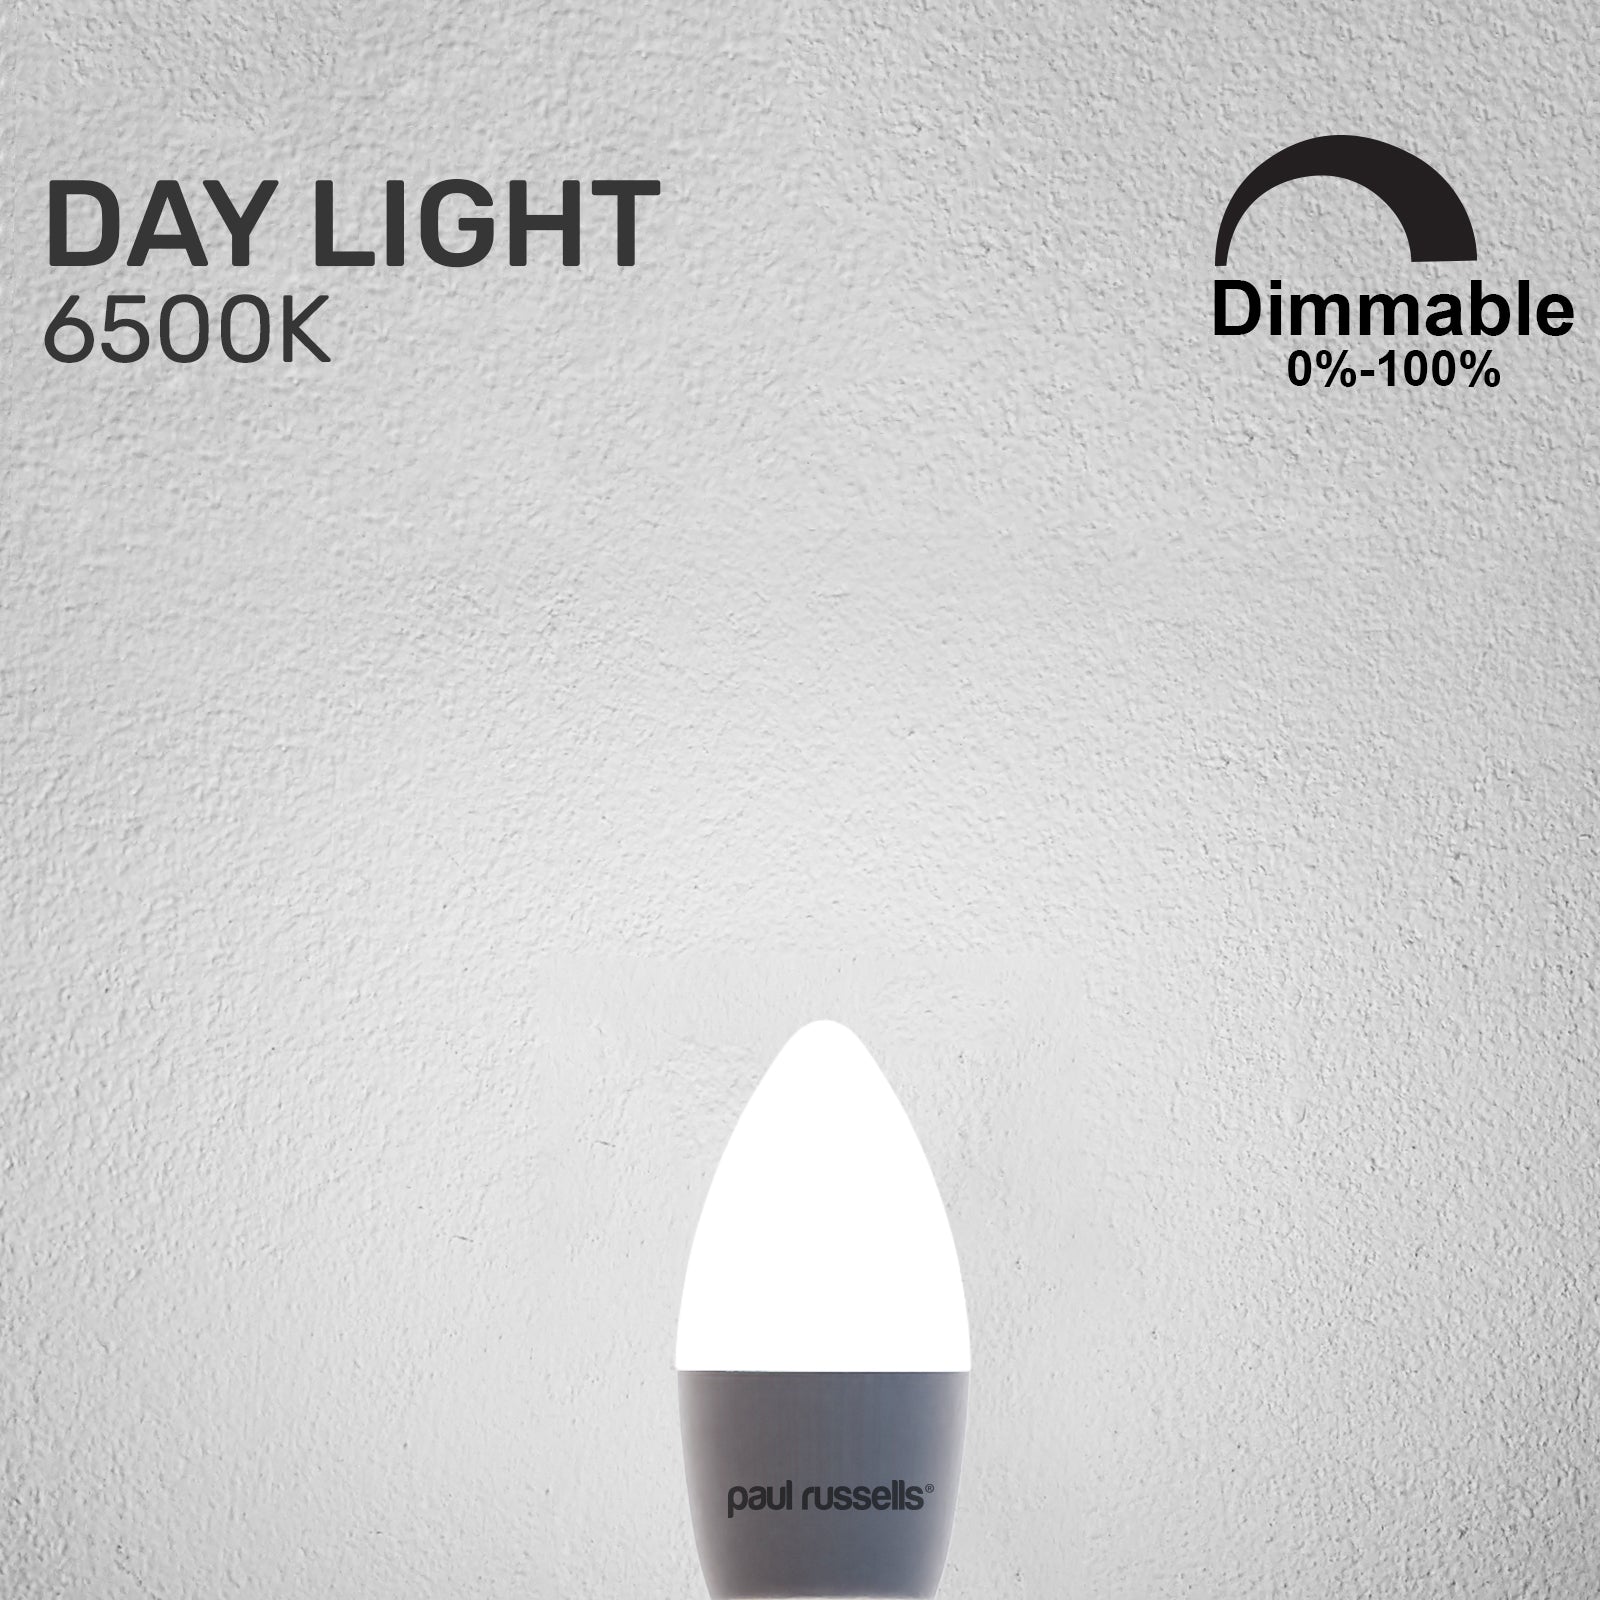 LED Dimmable Candle 5.5W (40w), SBC/B15, 470 Lumens, Day Light(6500K), 240V